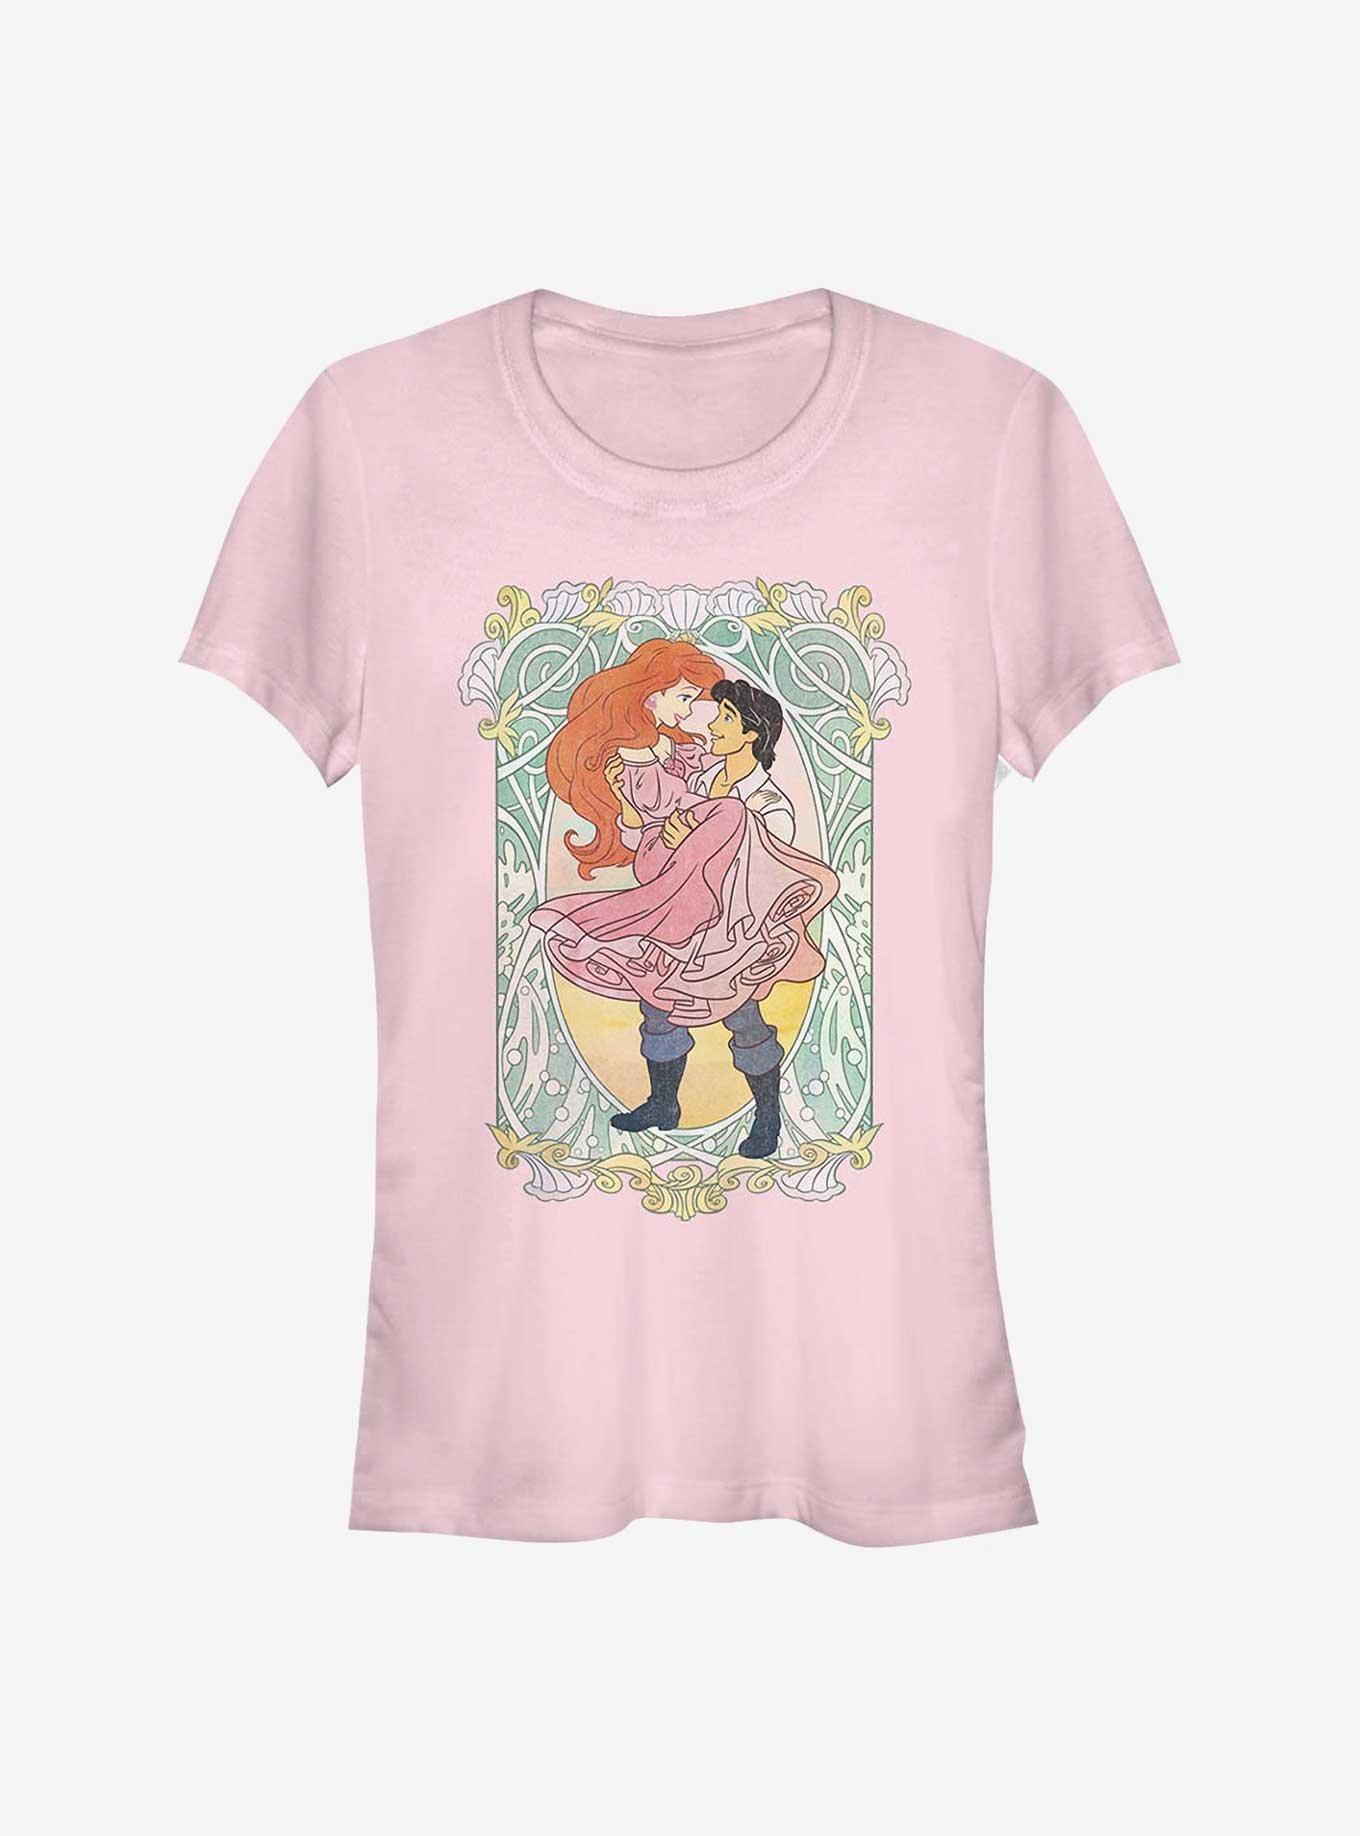 Disney The Little Mermaid Ariel and Eric Ever After Girls T-Shirt